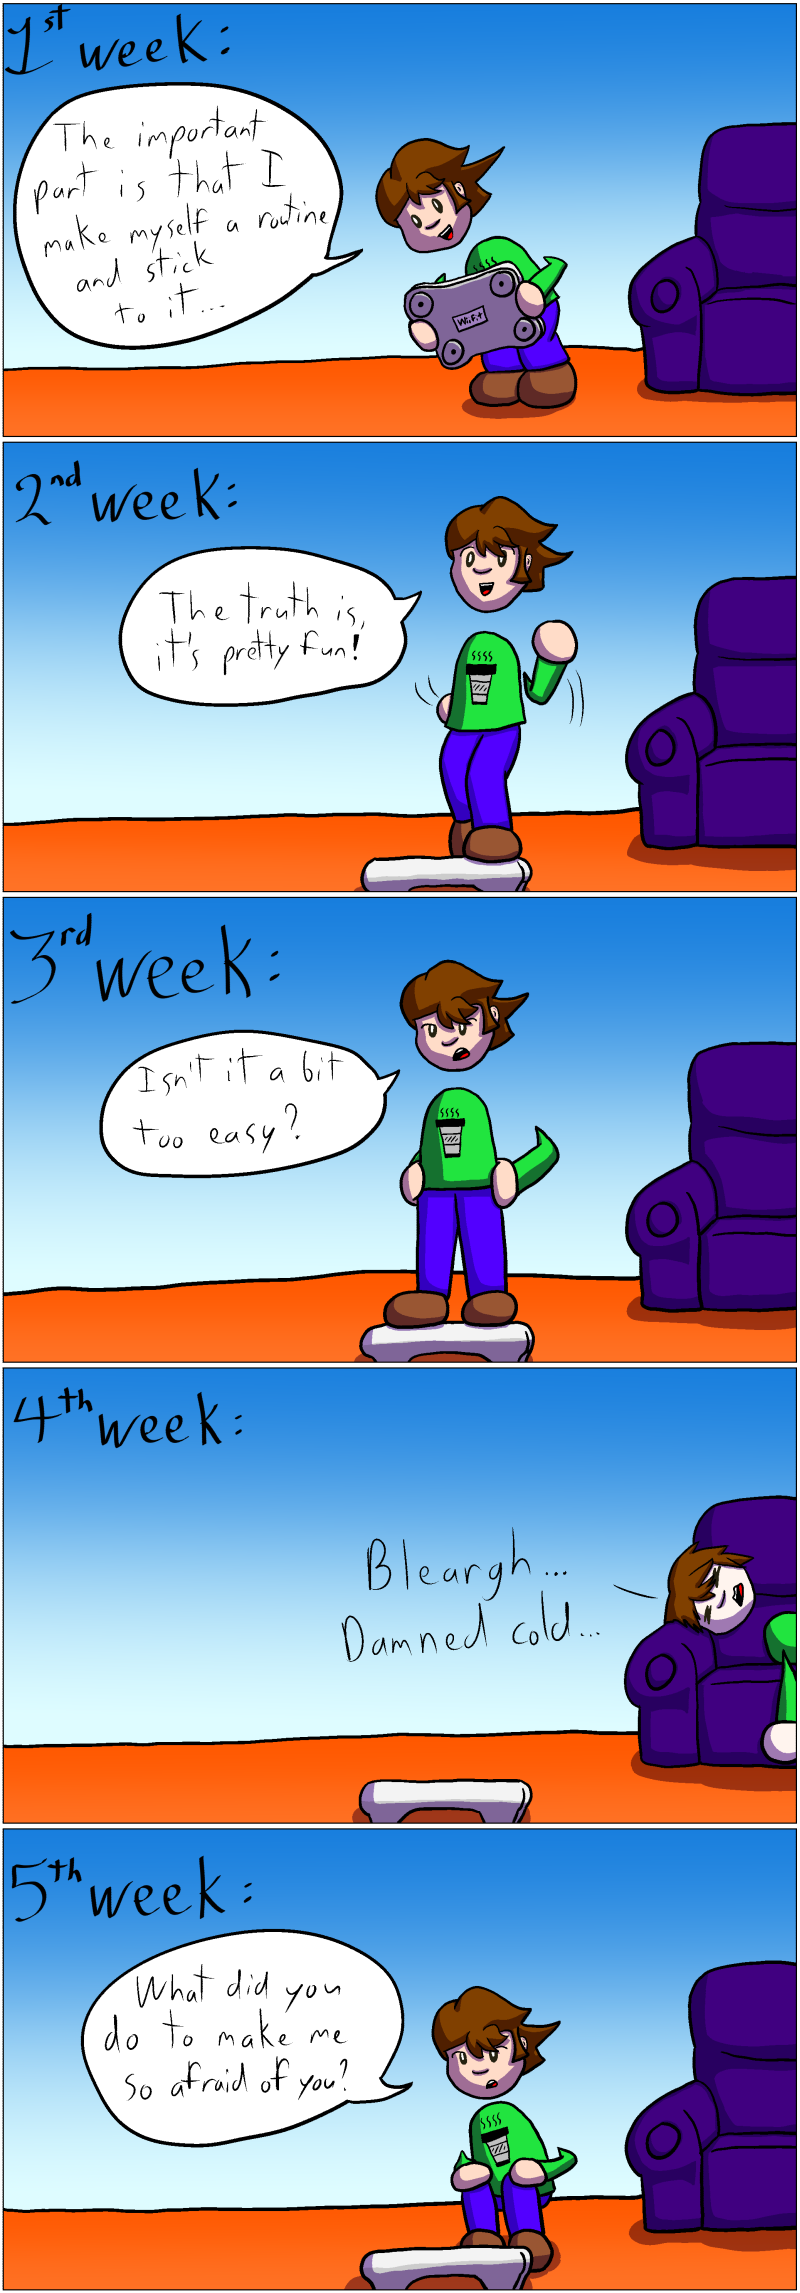 1st week: Michoune puts his Wii Balance Board in place. "The important part is that I make myself a routine and stick to it..." 2nd week: Michoune is working out with his Balance Board. "The truth is, it's pretty fun!" 3rd week: Michoune is standing on the board. "Isn't it a bit too easy?" 4th week: Michoune lays on the couch, sick. "Bleargh... Damned cold..." 5th week: Michoune is sitting besides his board. "What did you do to make me so afraid of you?"